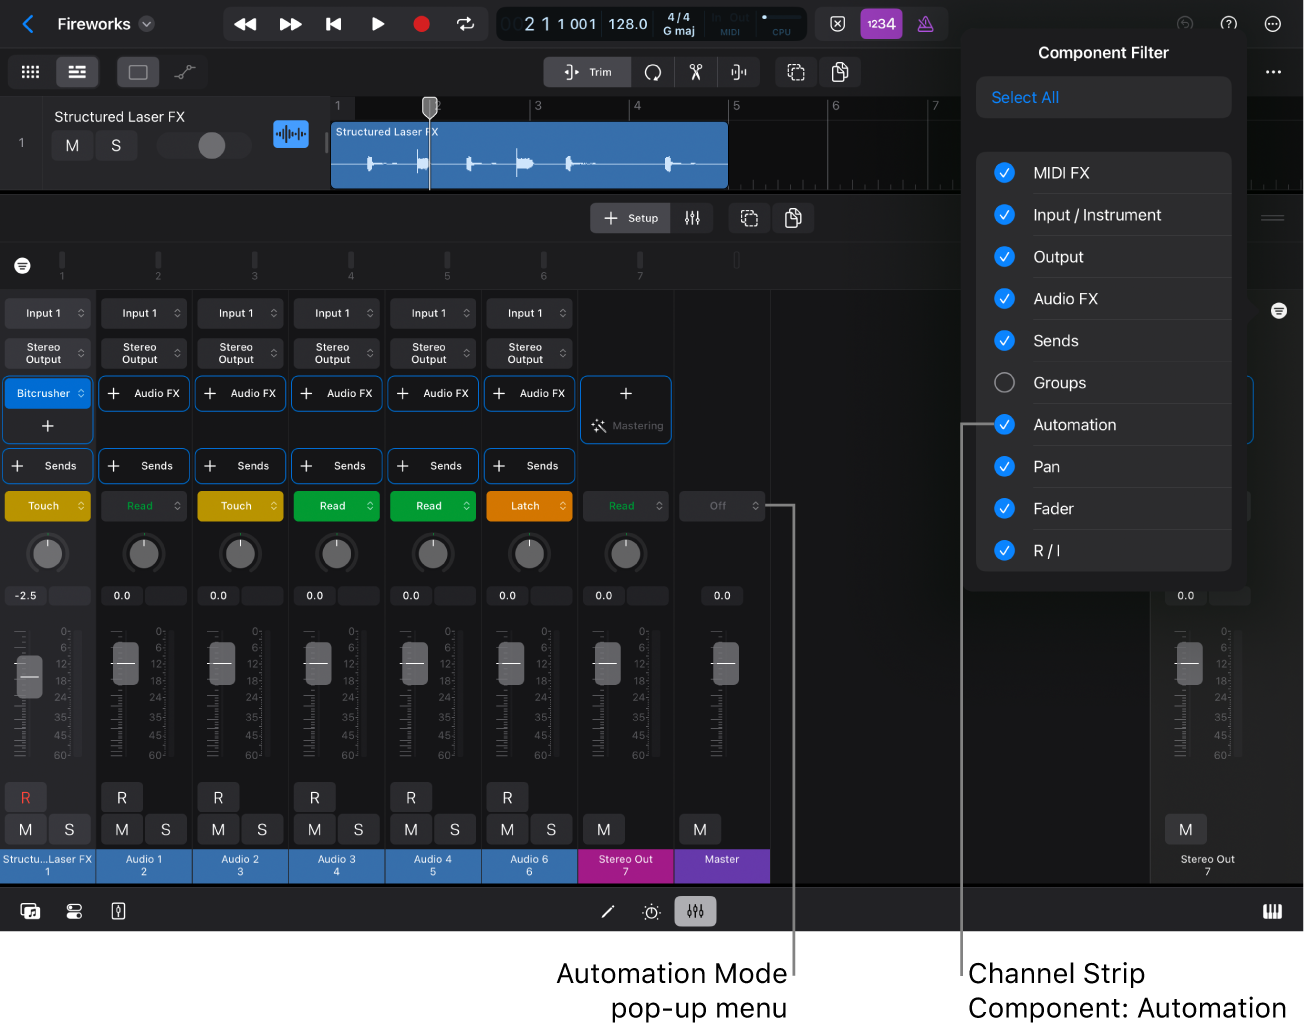 Figure. Automation Mode pop-up menu in the Mixer.